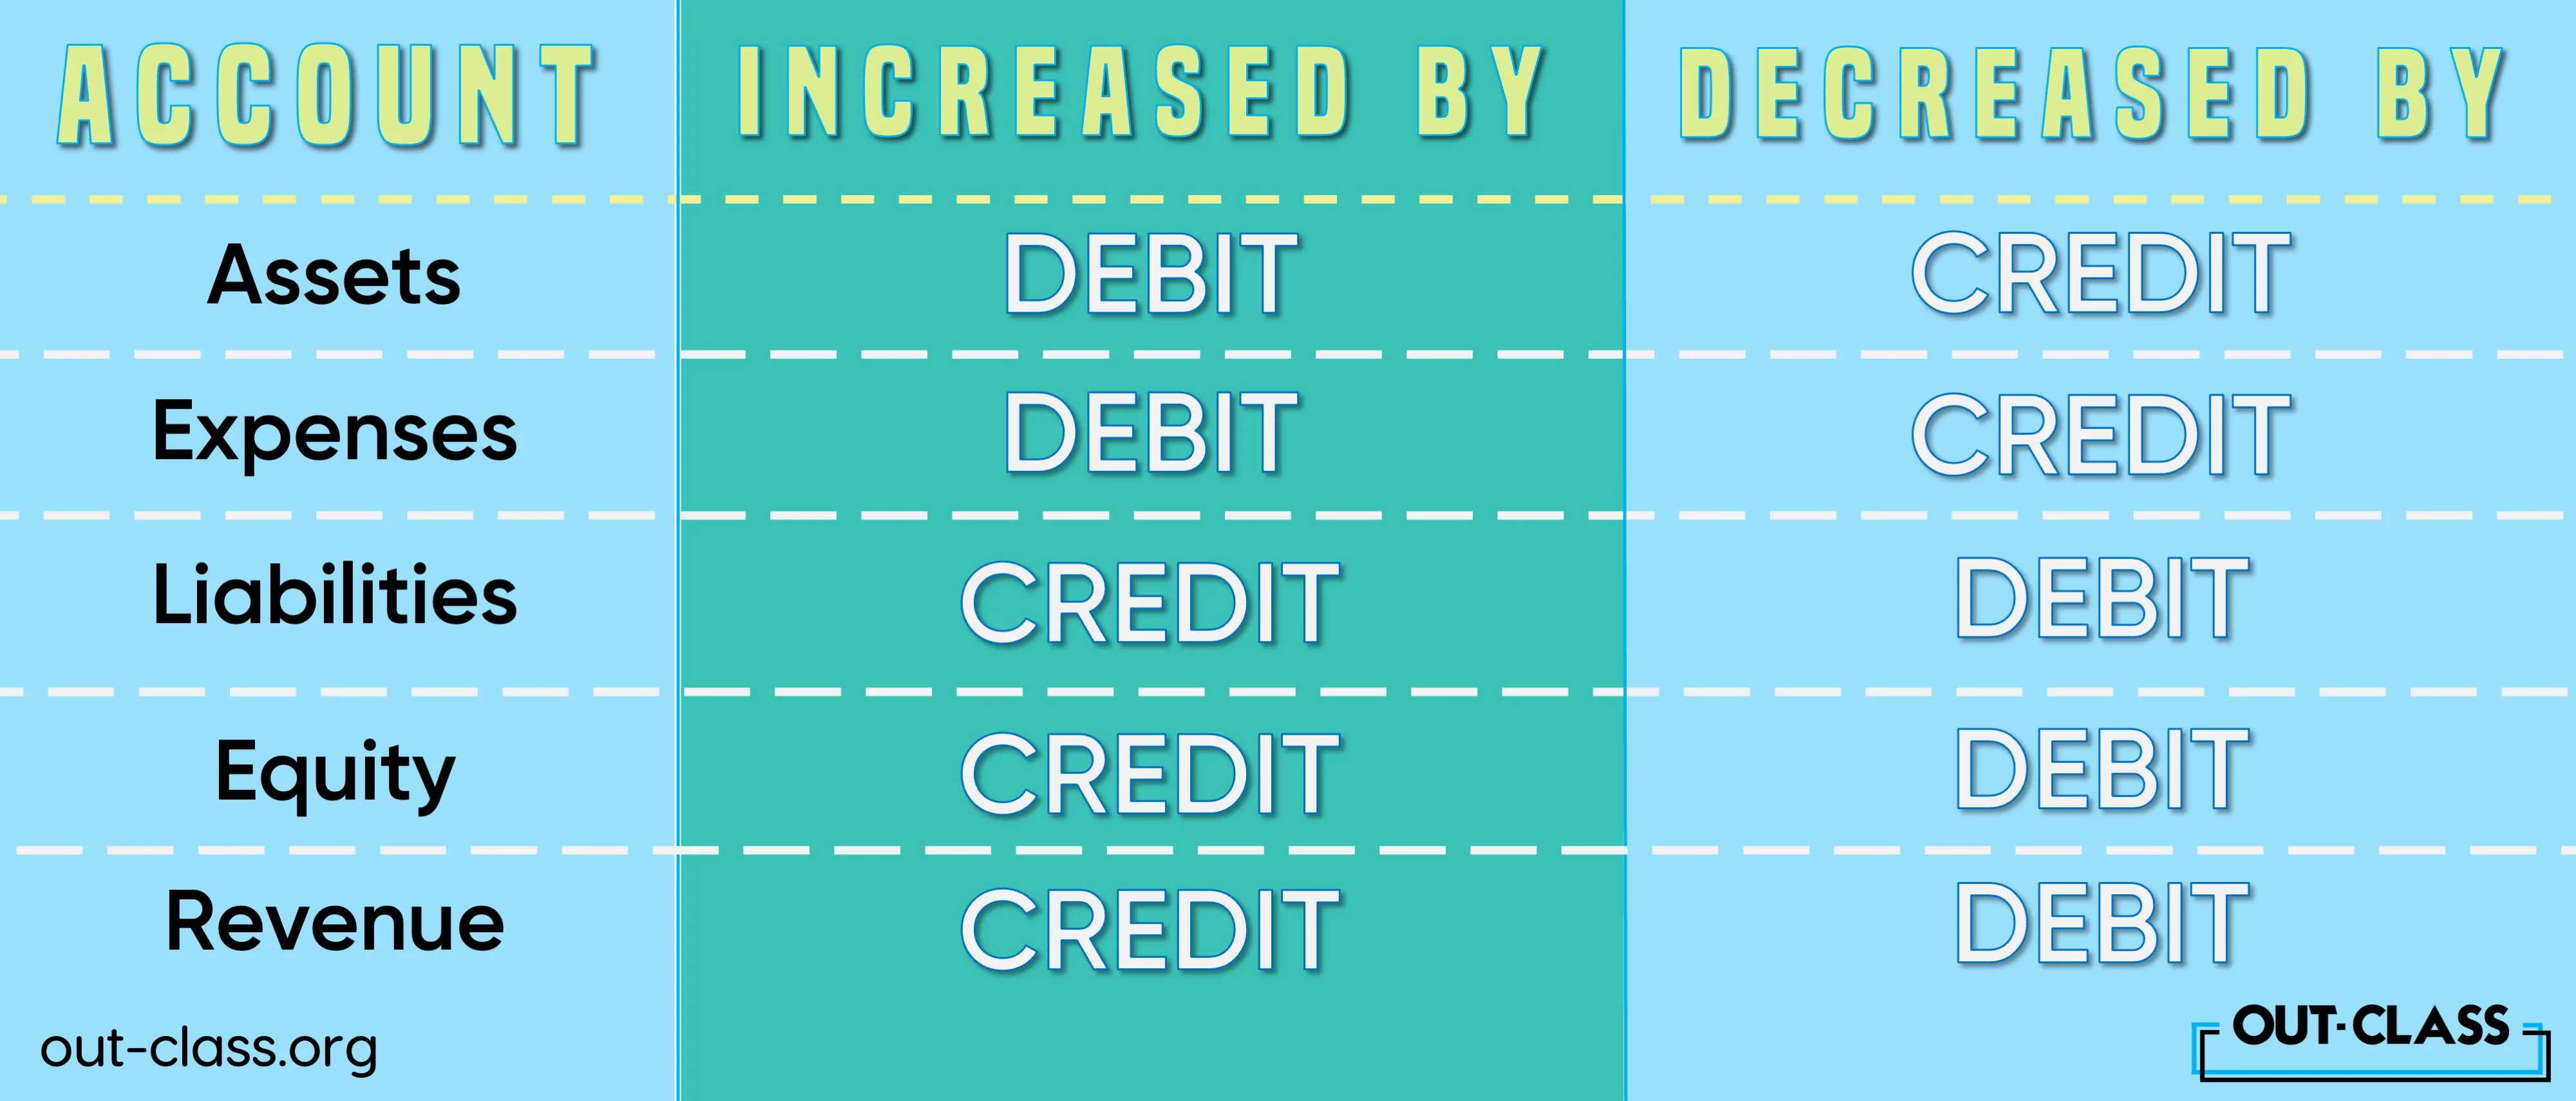 Debit vs credit is a basic accounting principle and concept that occurs in the first few chapters of O Level Accounting.